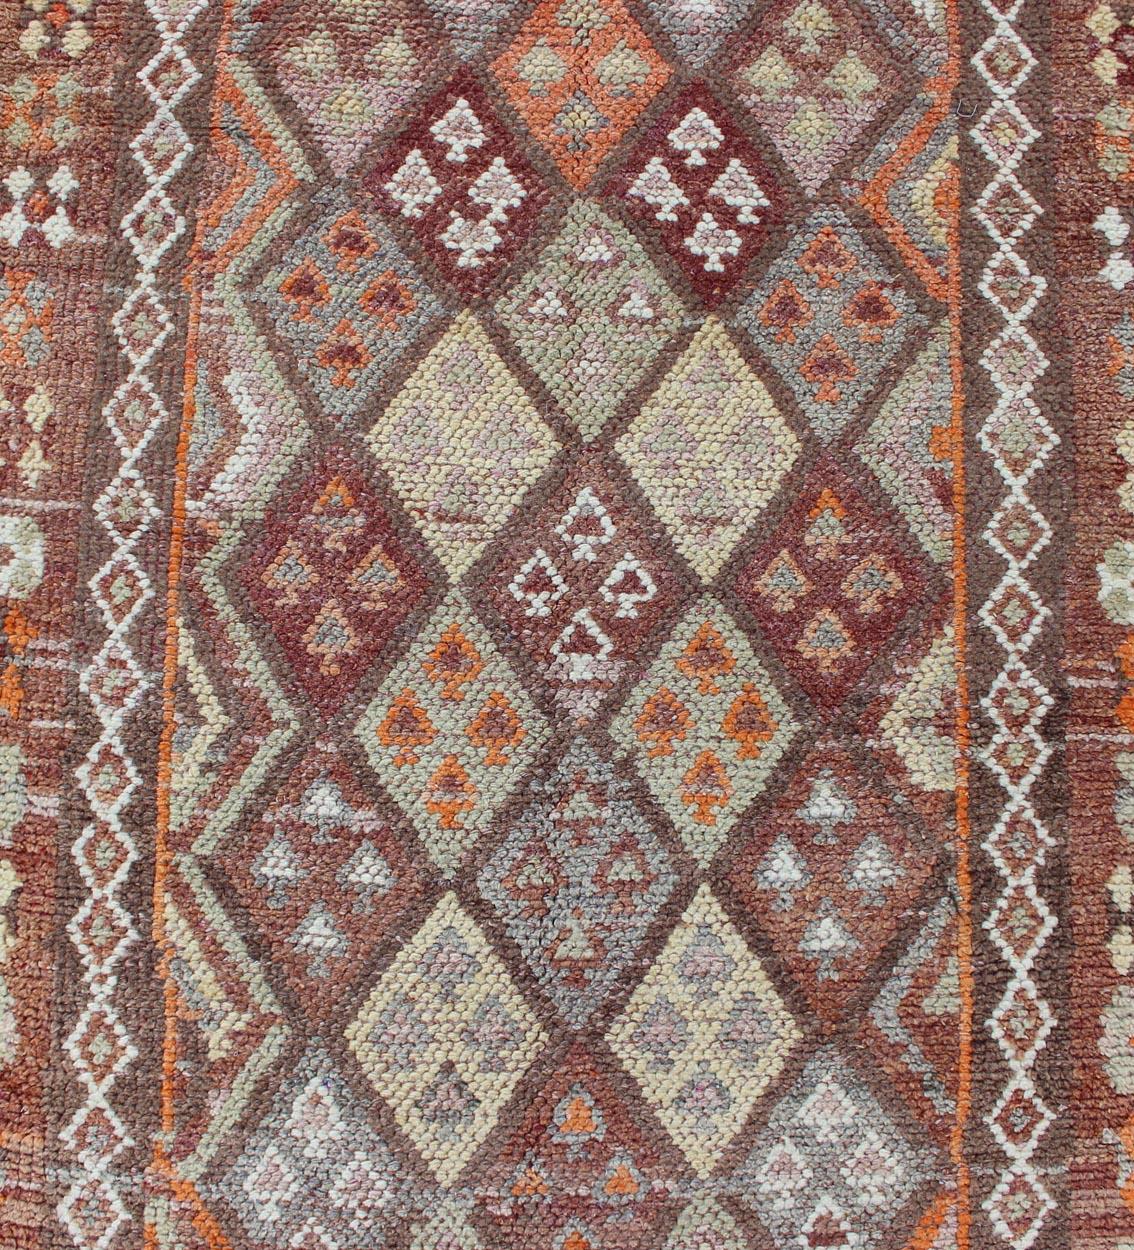 Vintage Turkish Runner with All-Over Diamond Kurdish Design in Multi-Colors For Sale 1